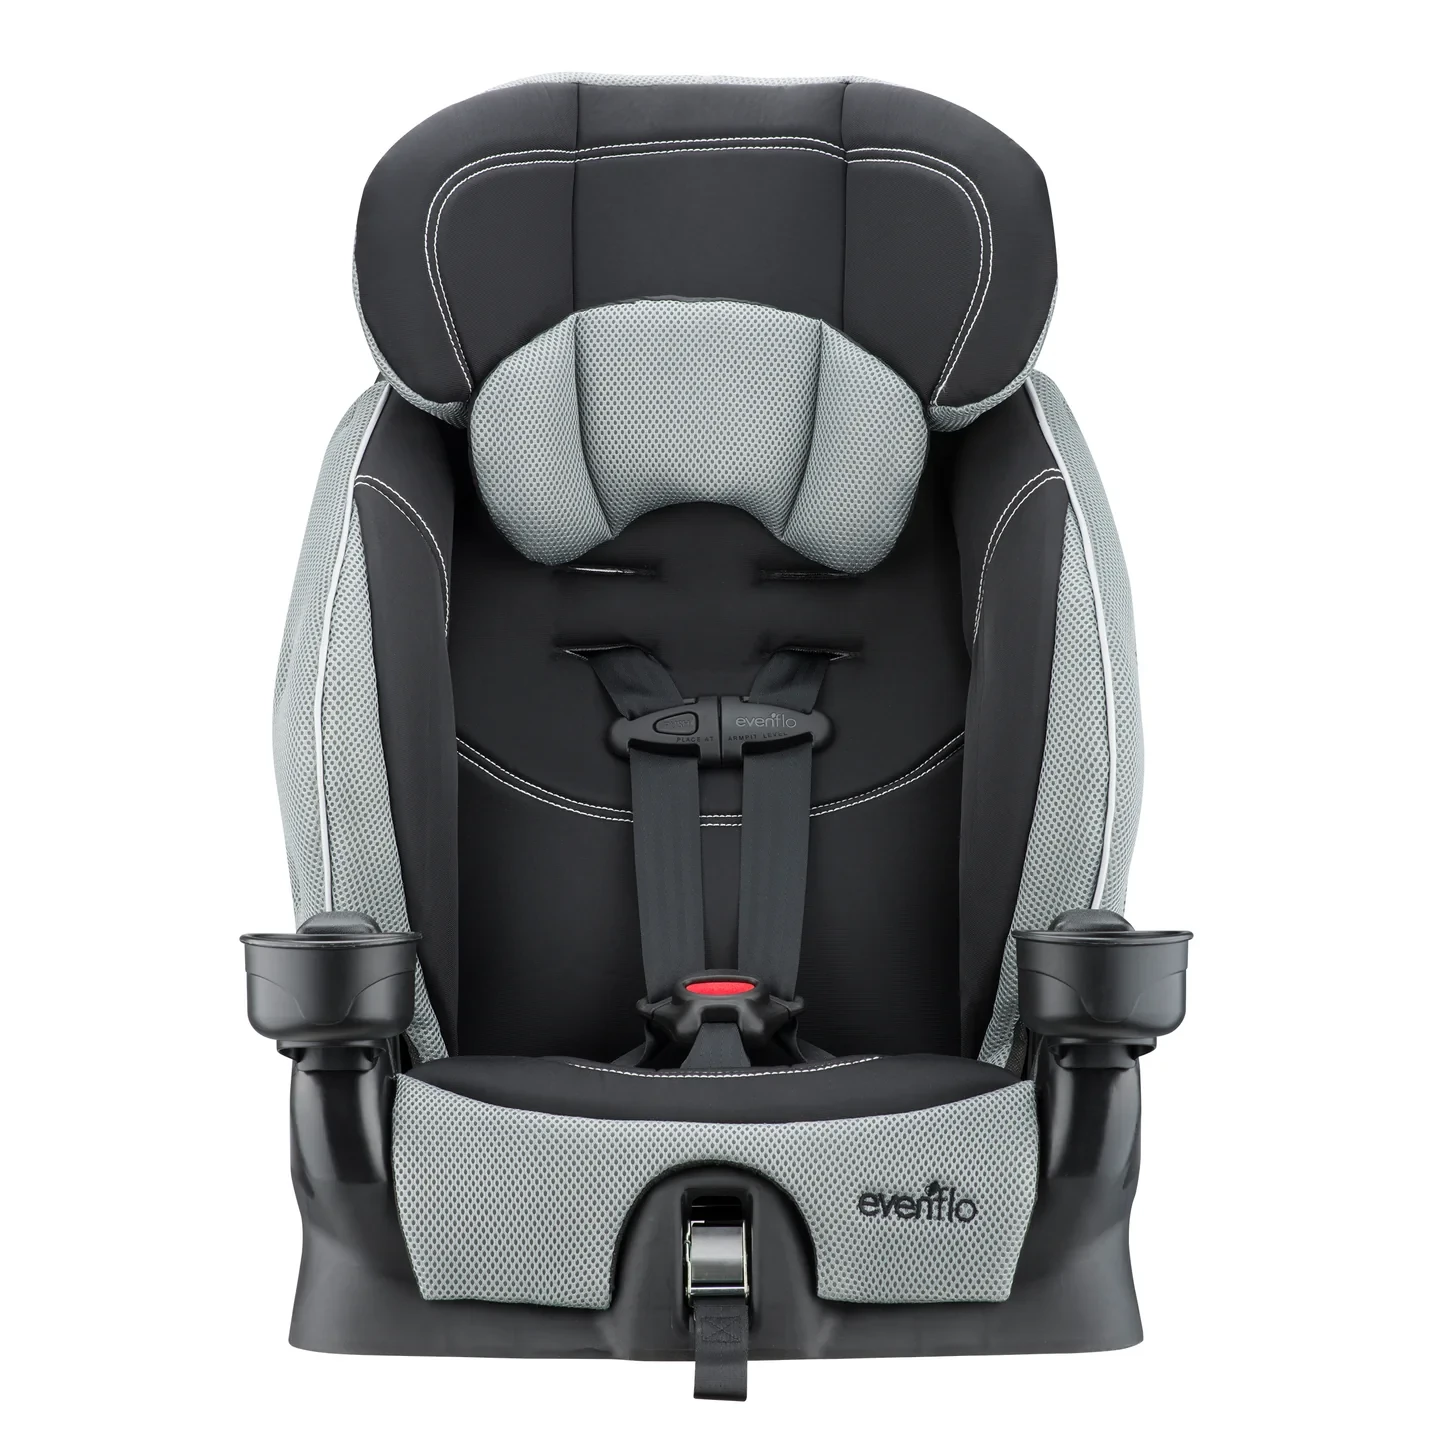 EvenFlo Chase LX Booster Car Seat